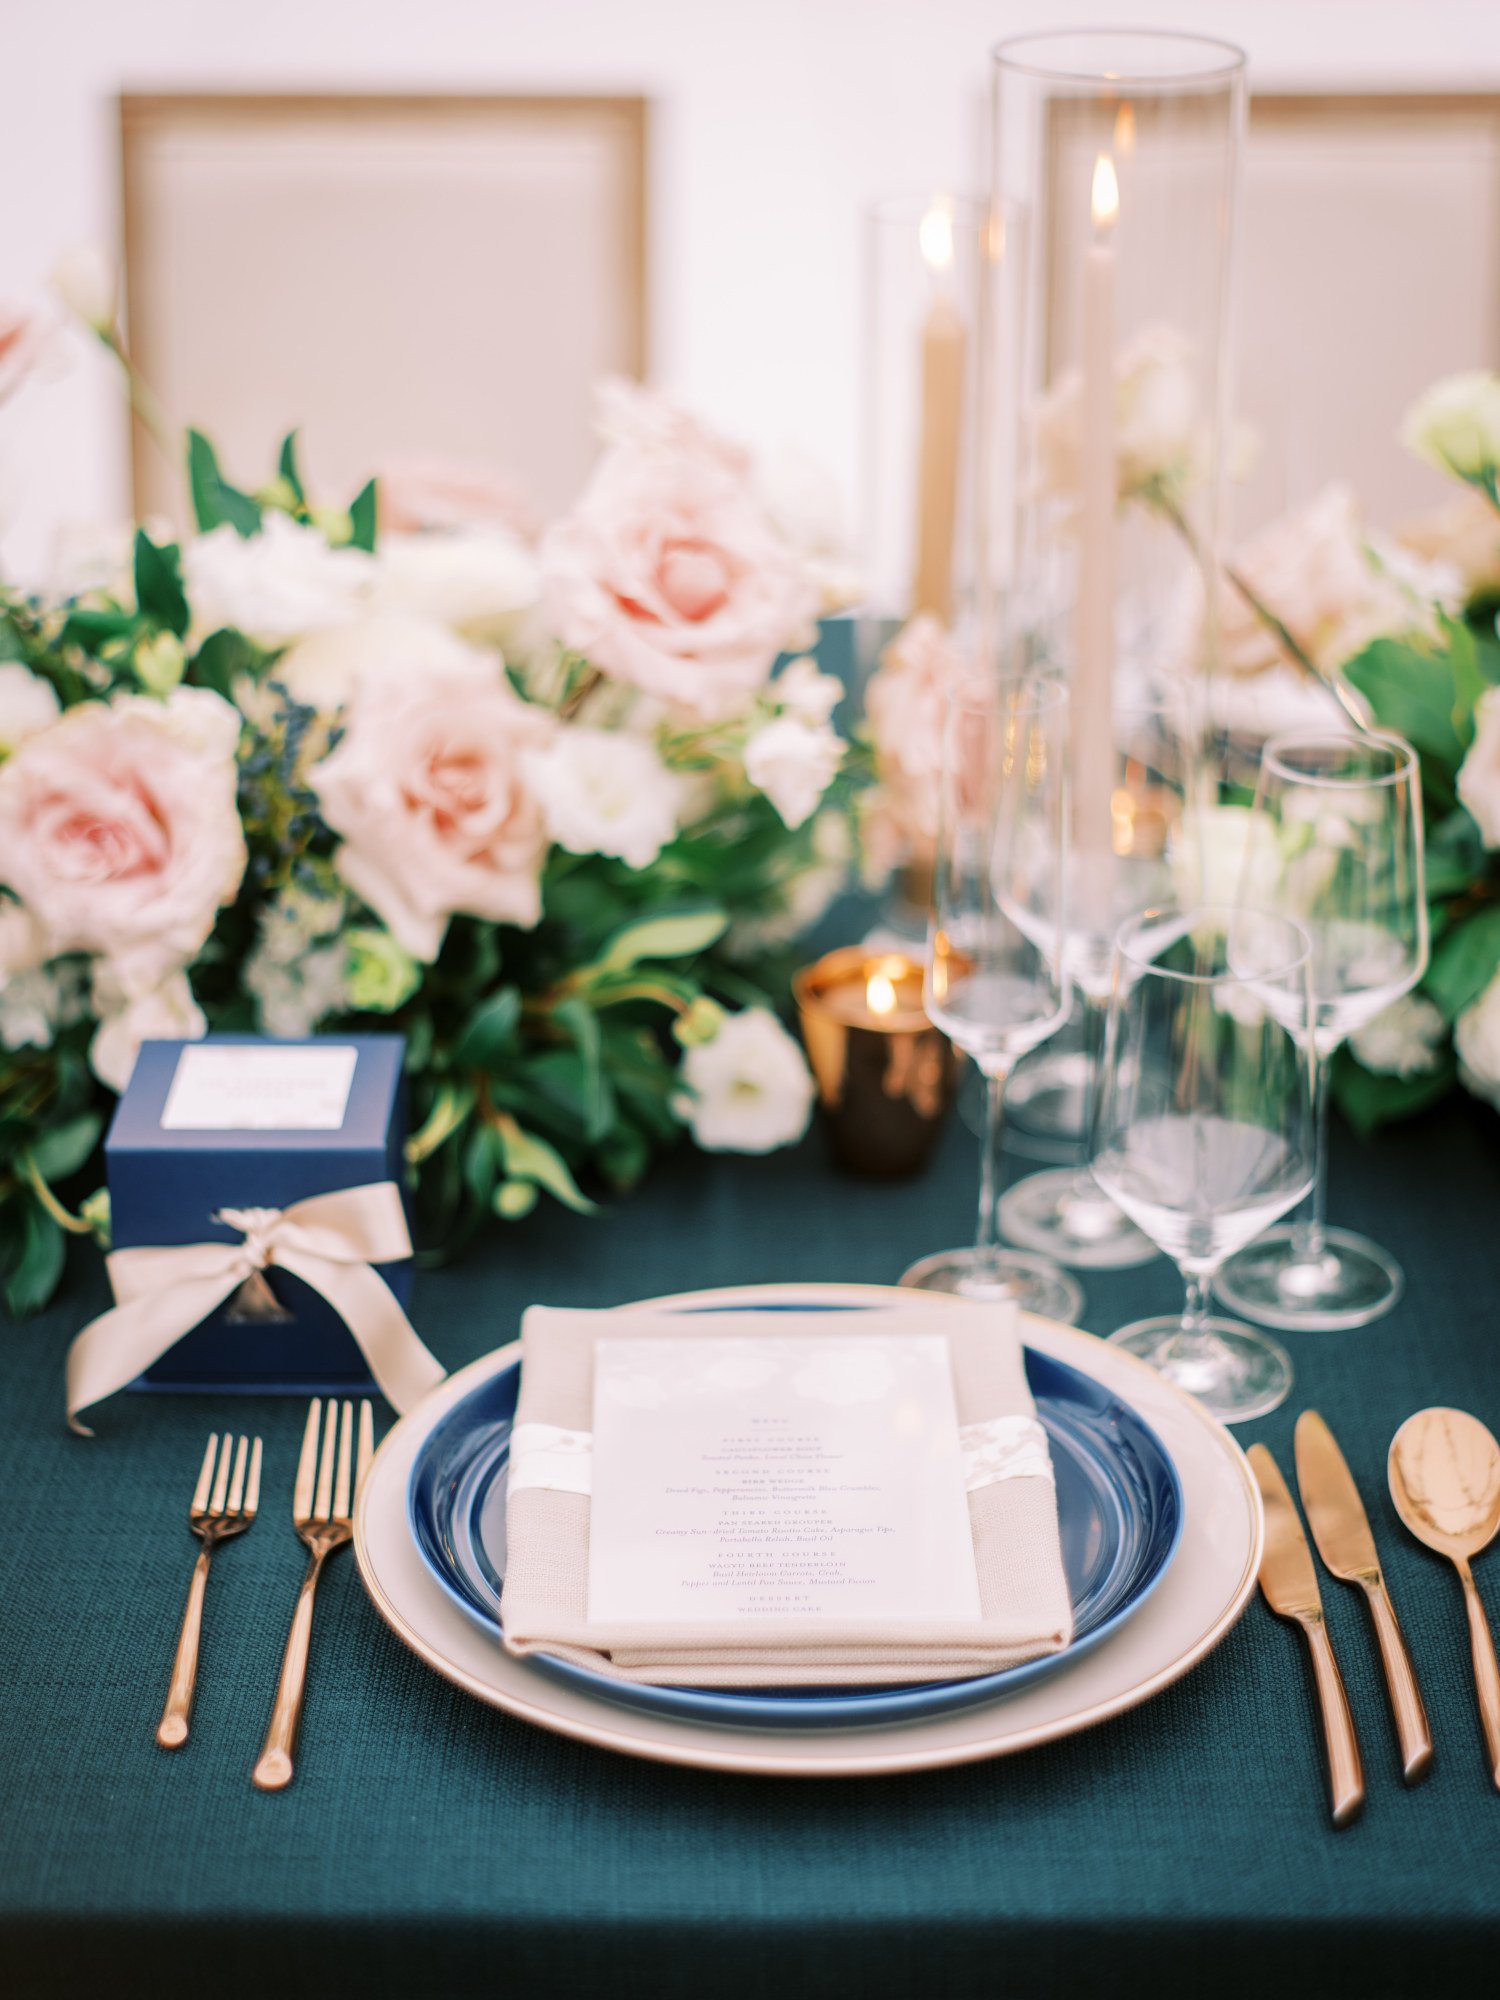 Wedding-Tabletop-Details-Place-Setting-Rebecca-Rose-Events.jpg